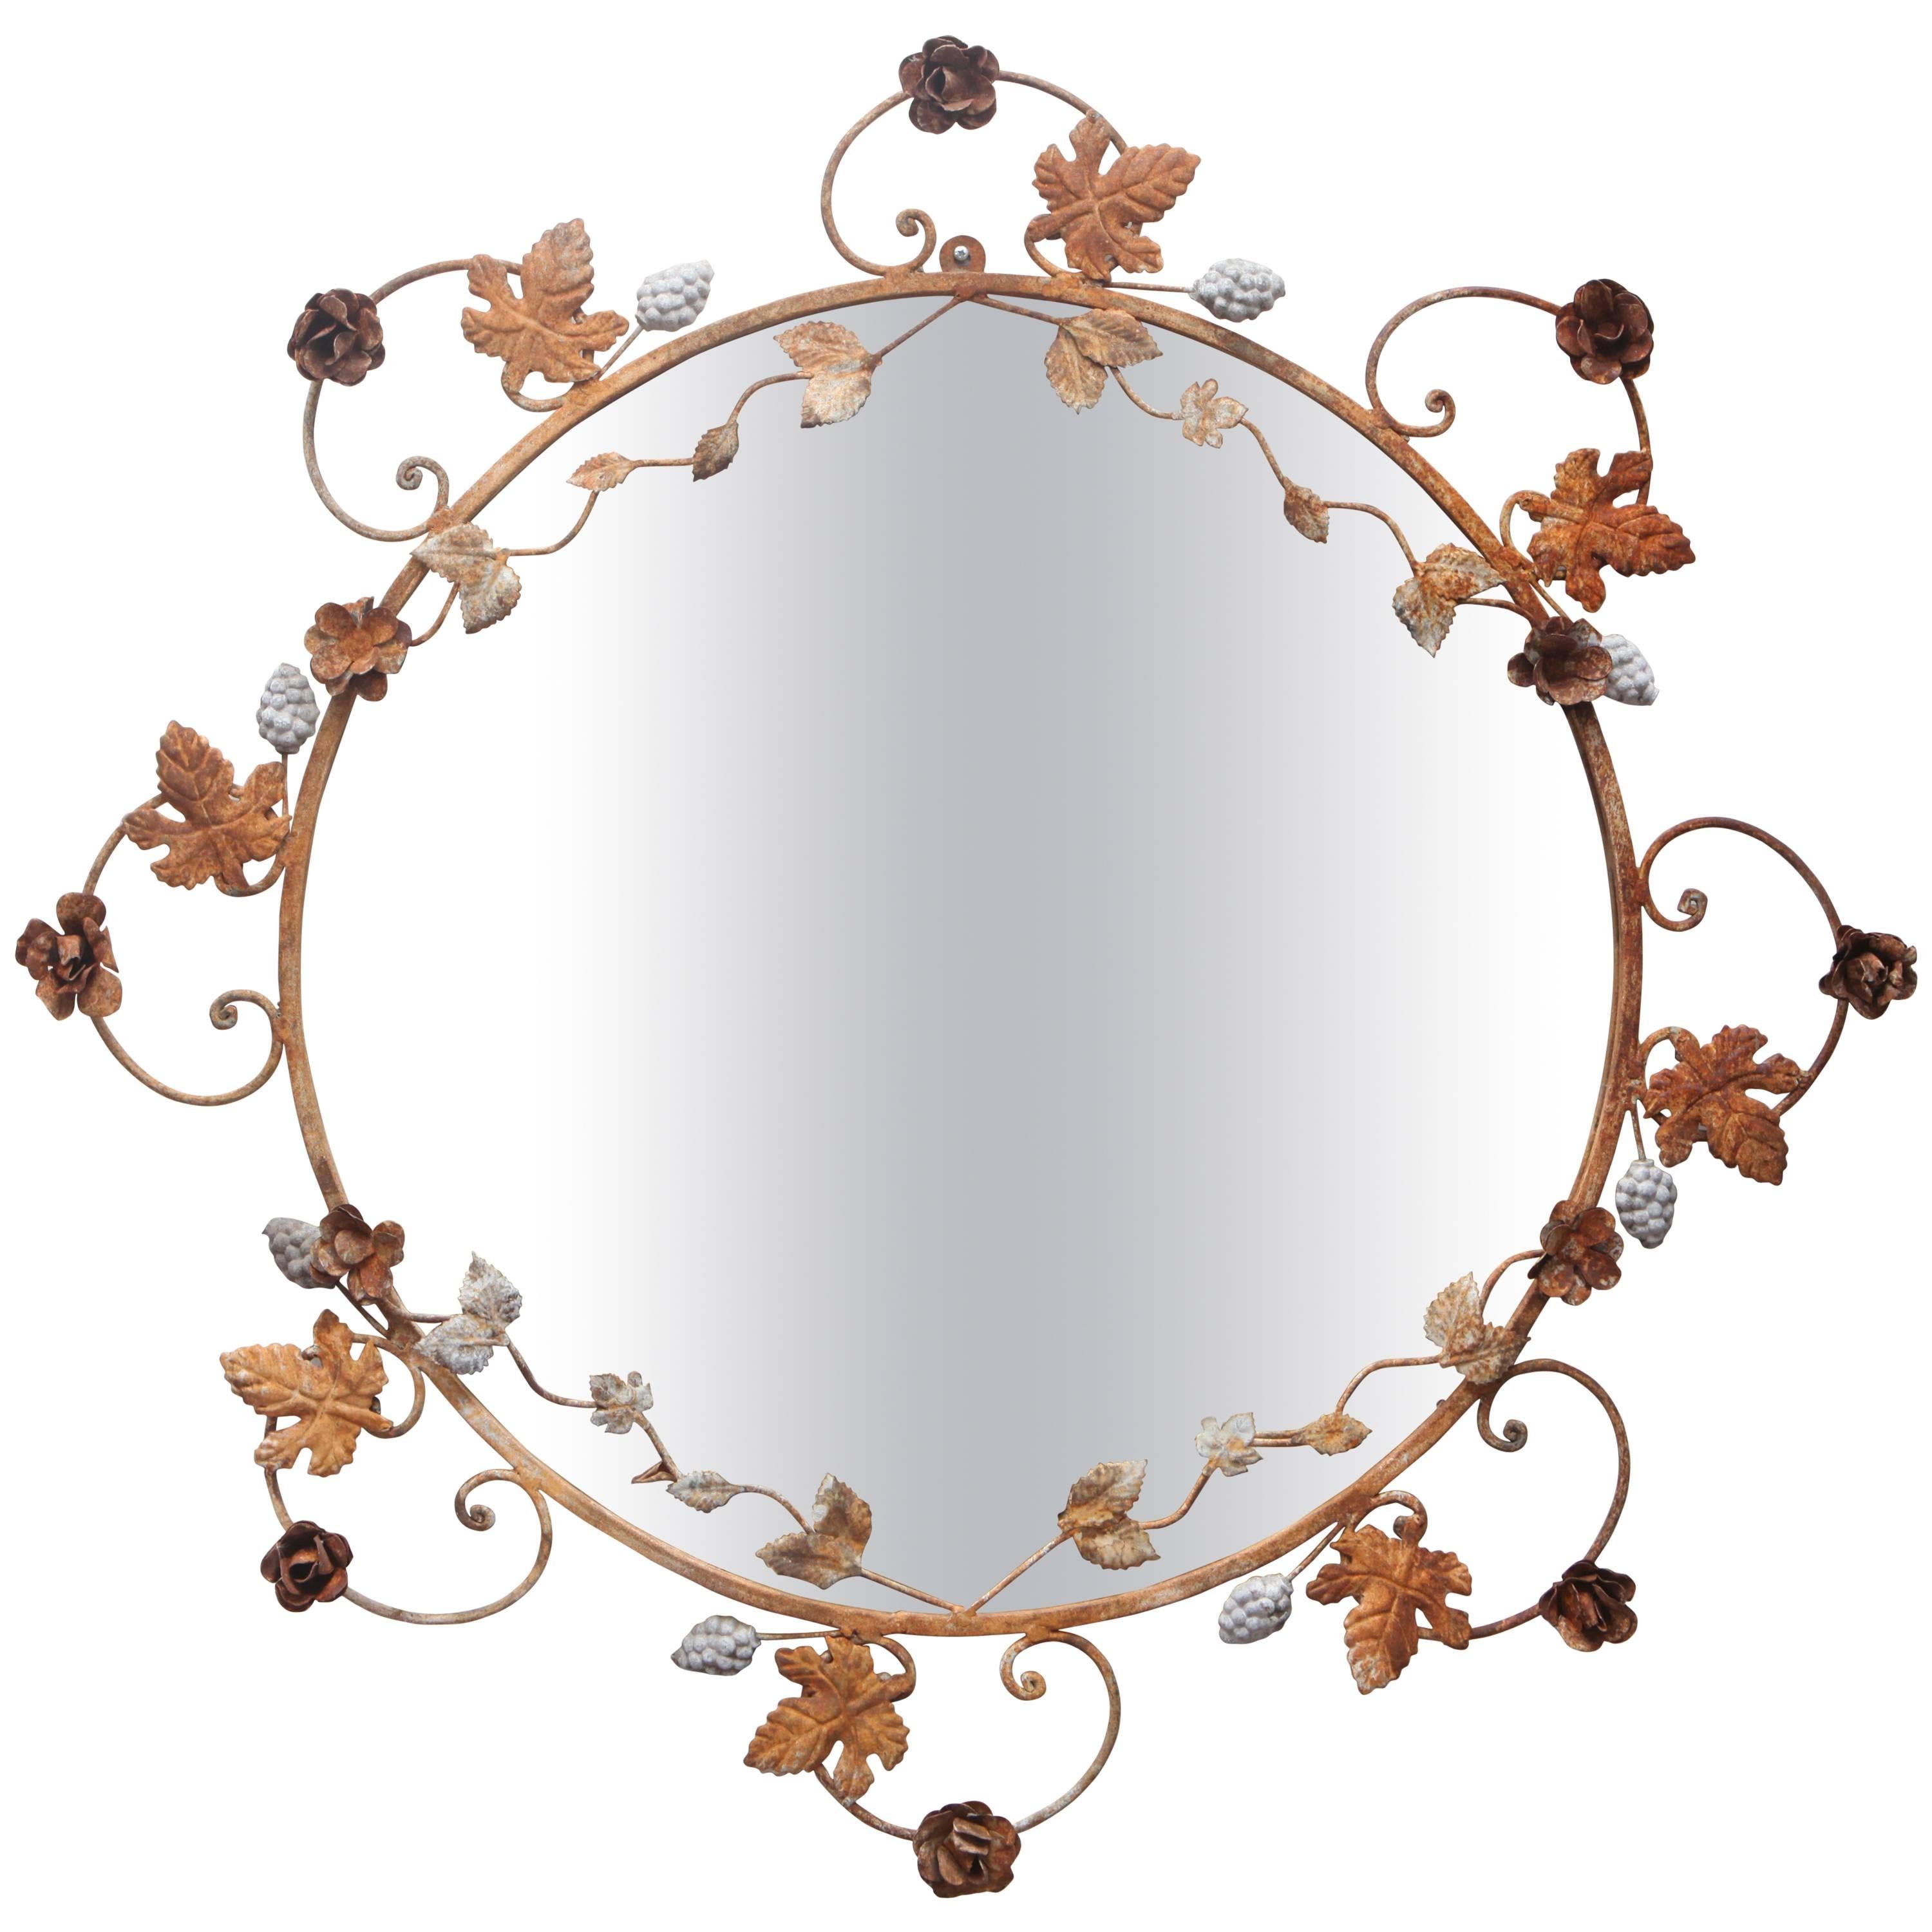 Flower and Leaves Rusted Metal Mirror For Sale